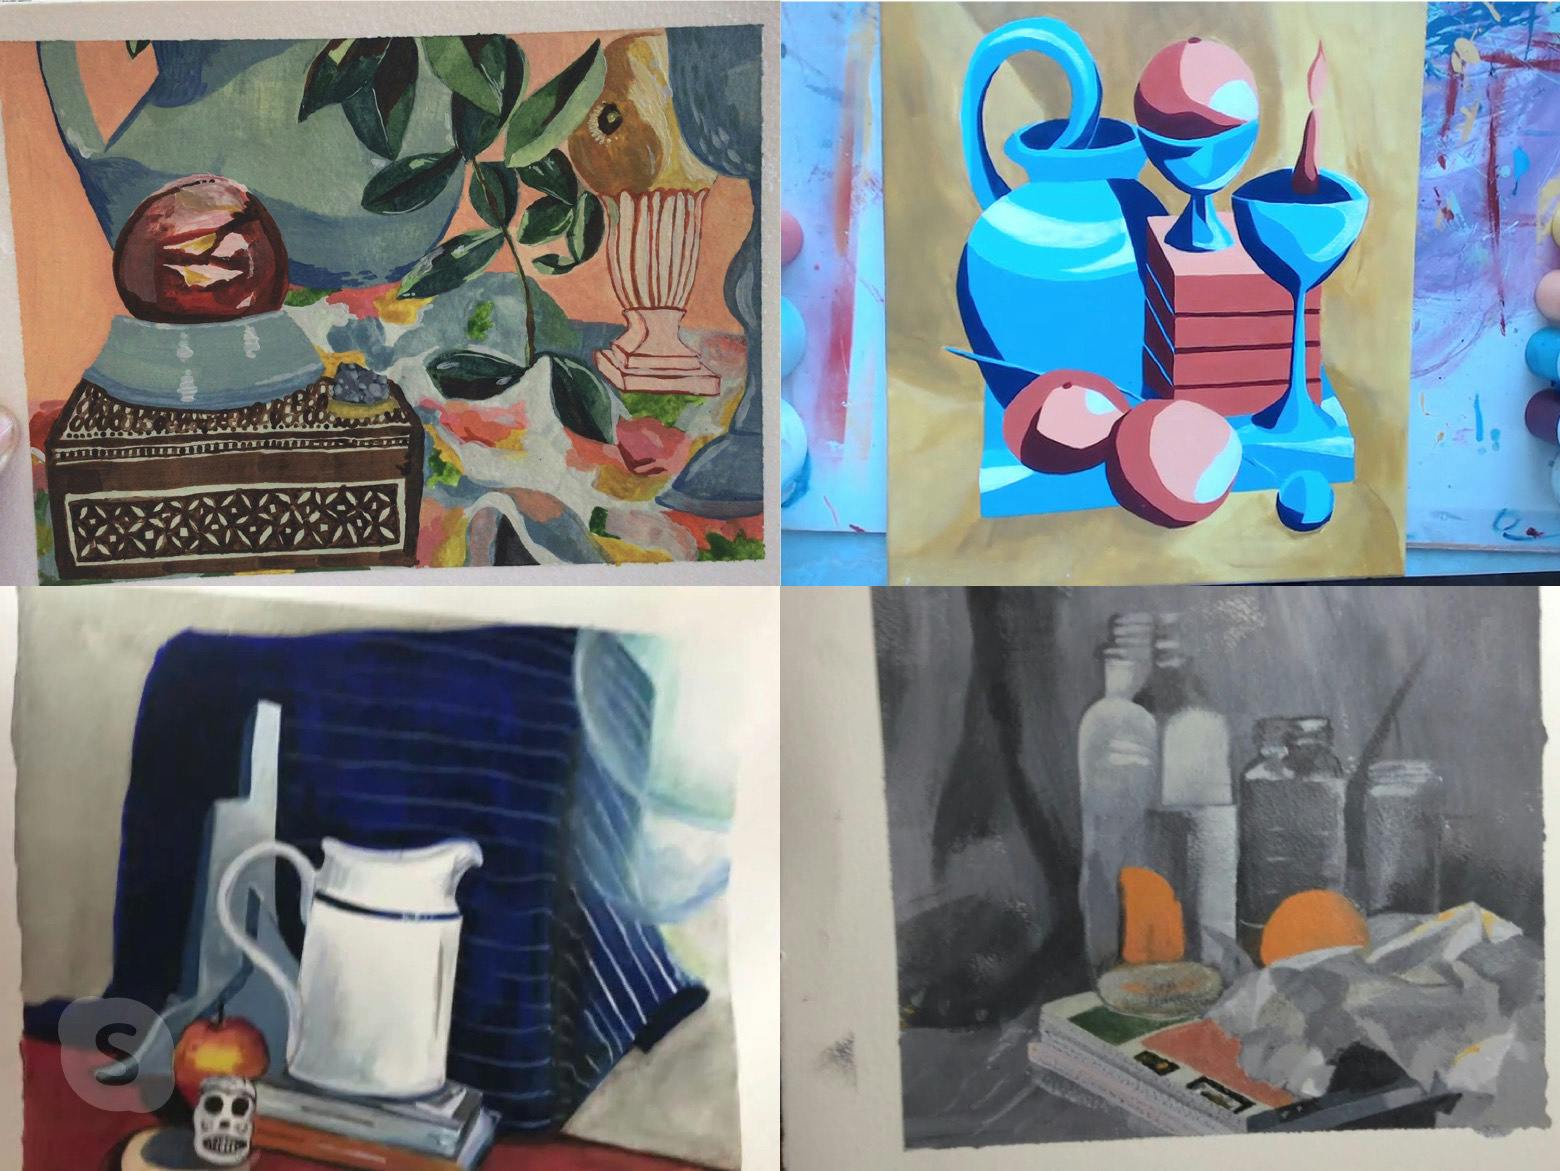 Four still life images created in an online drawing session